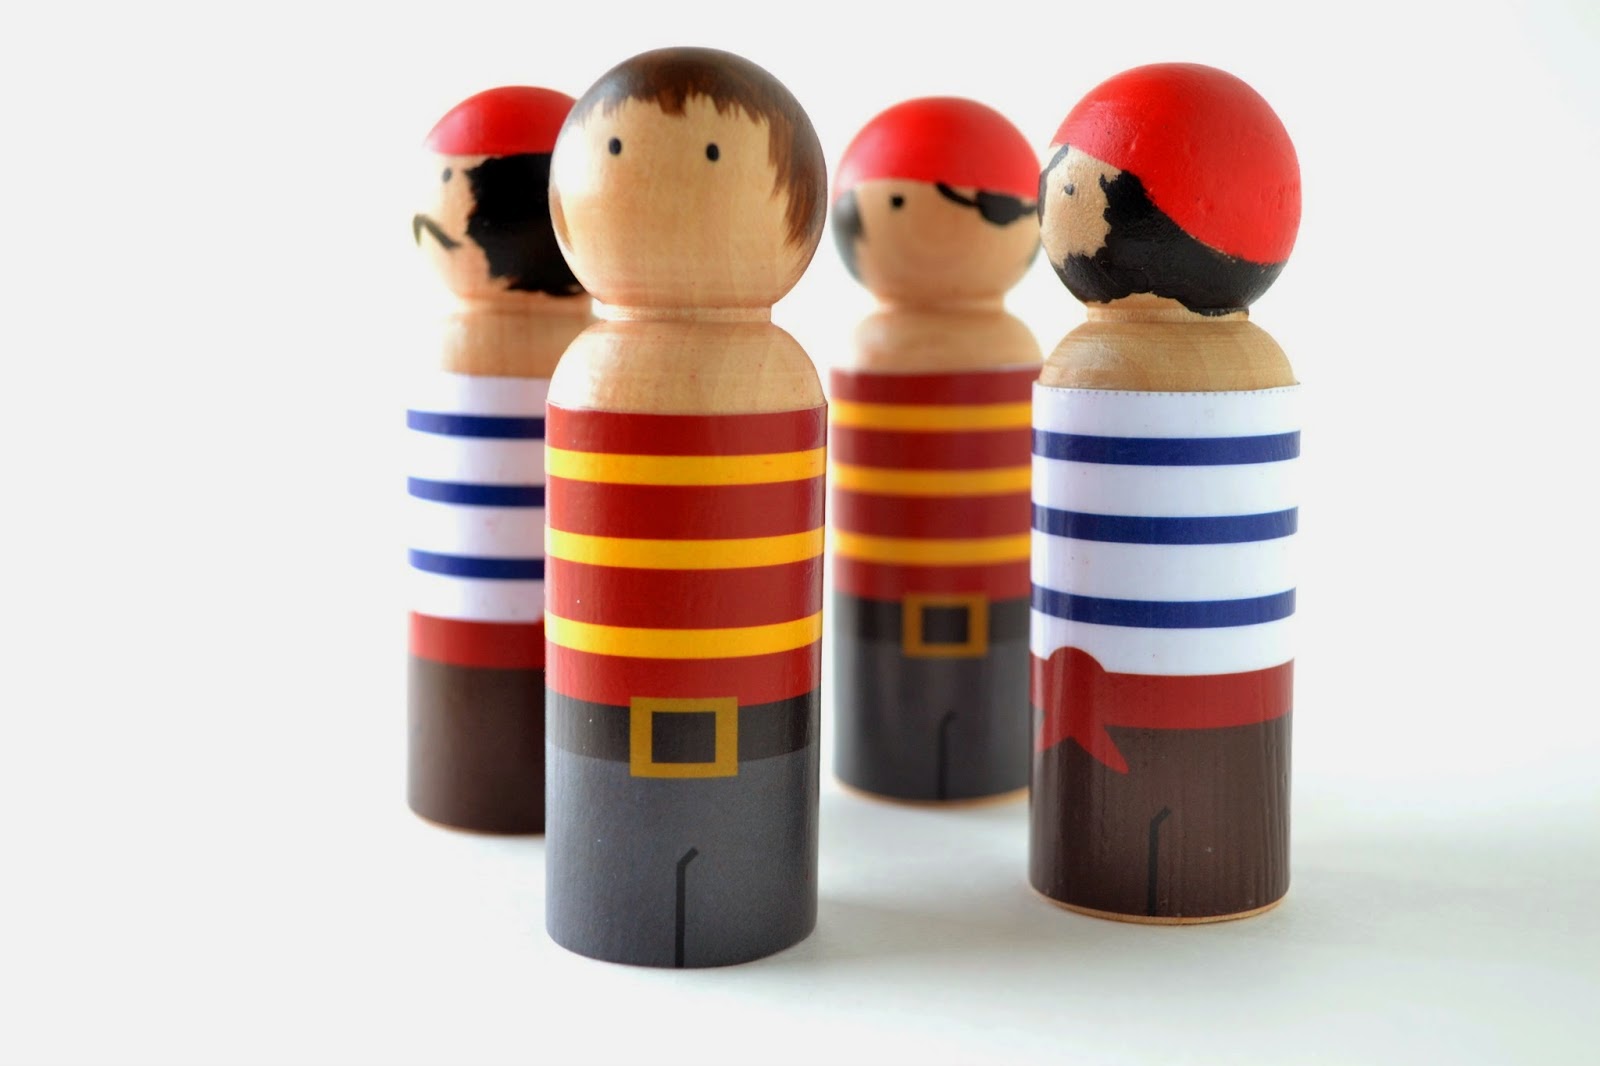 http://www.untrendylife.com/2014/03/peg-people-pirate-clothes-free-printable.html